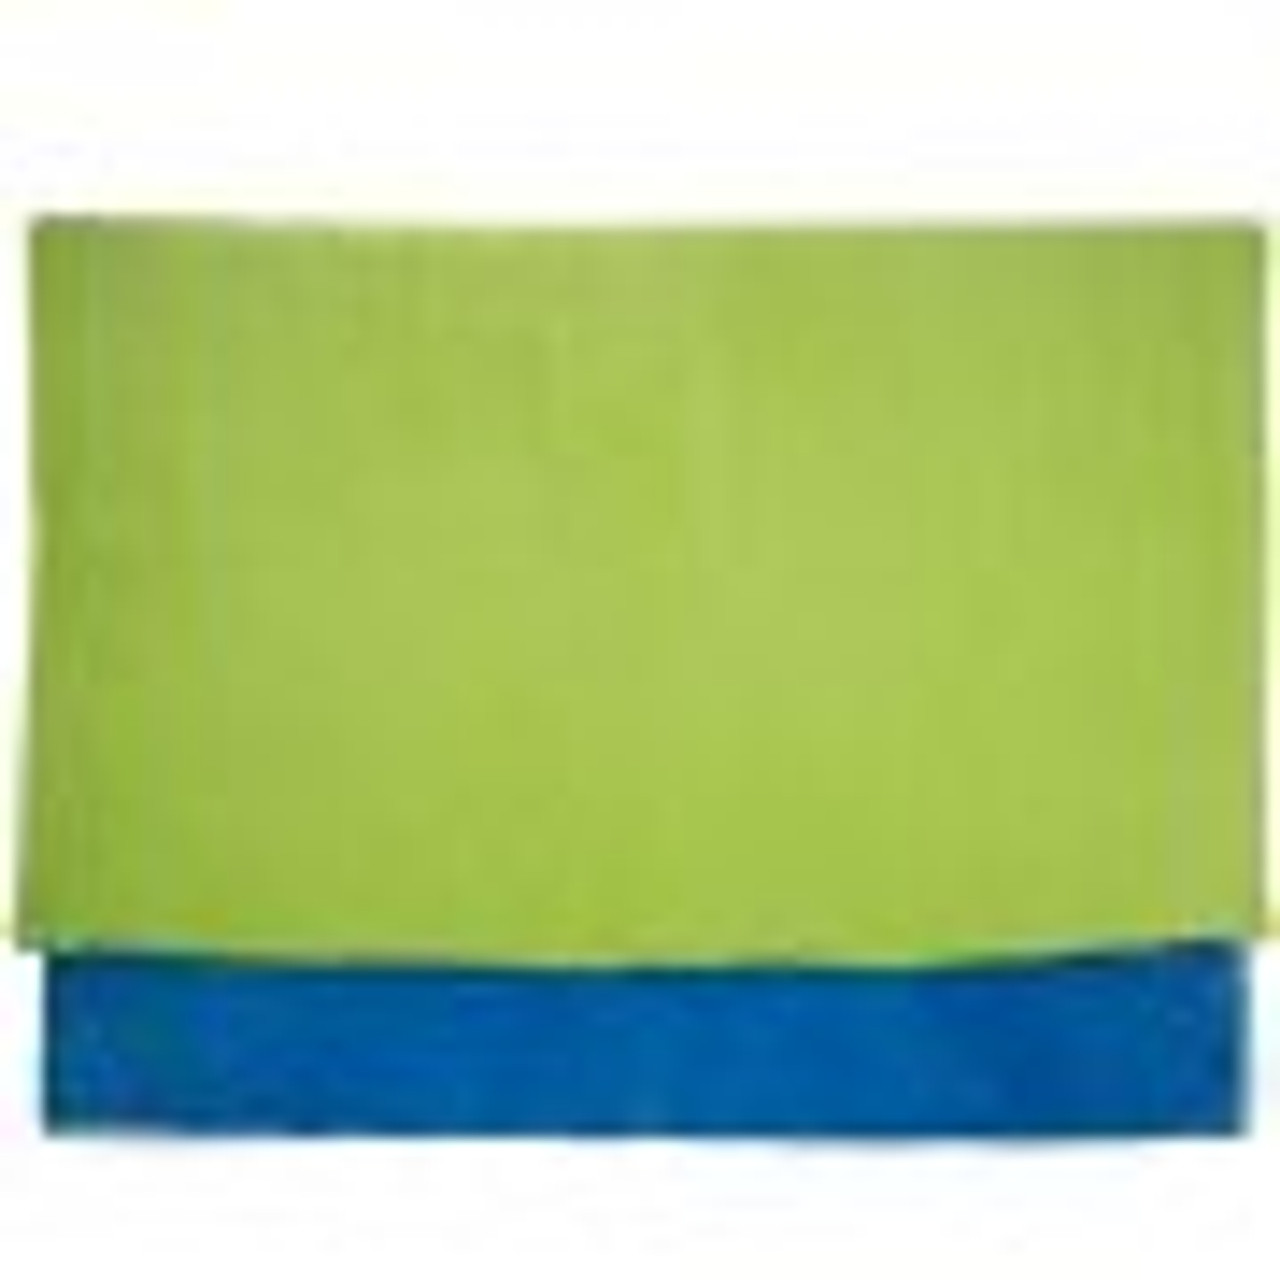 Weighted Blanket 60x80" 15 lbs With Duvet Cover For Adults & Kids Natural Sleep, Blue and green color